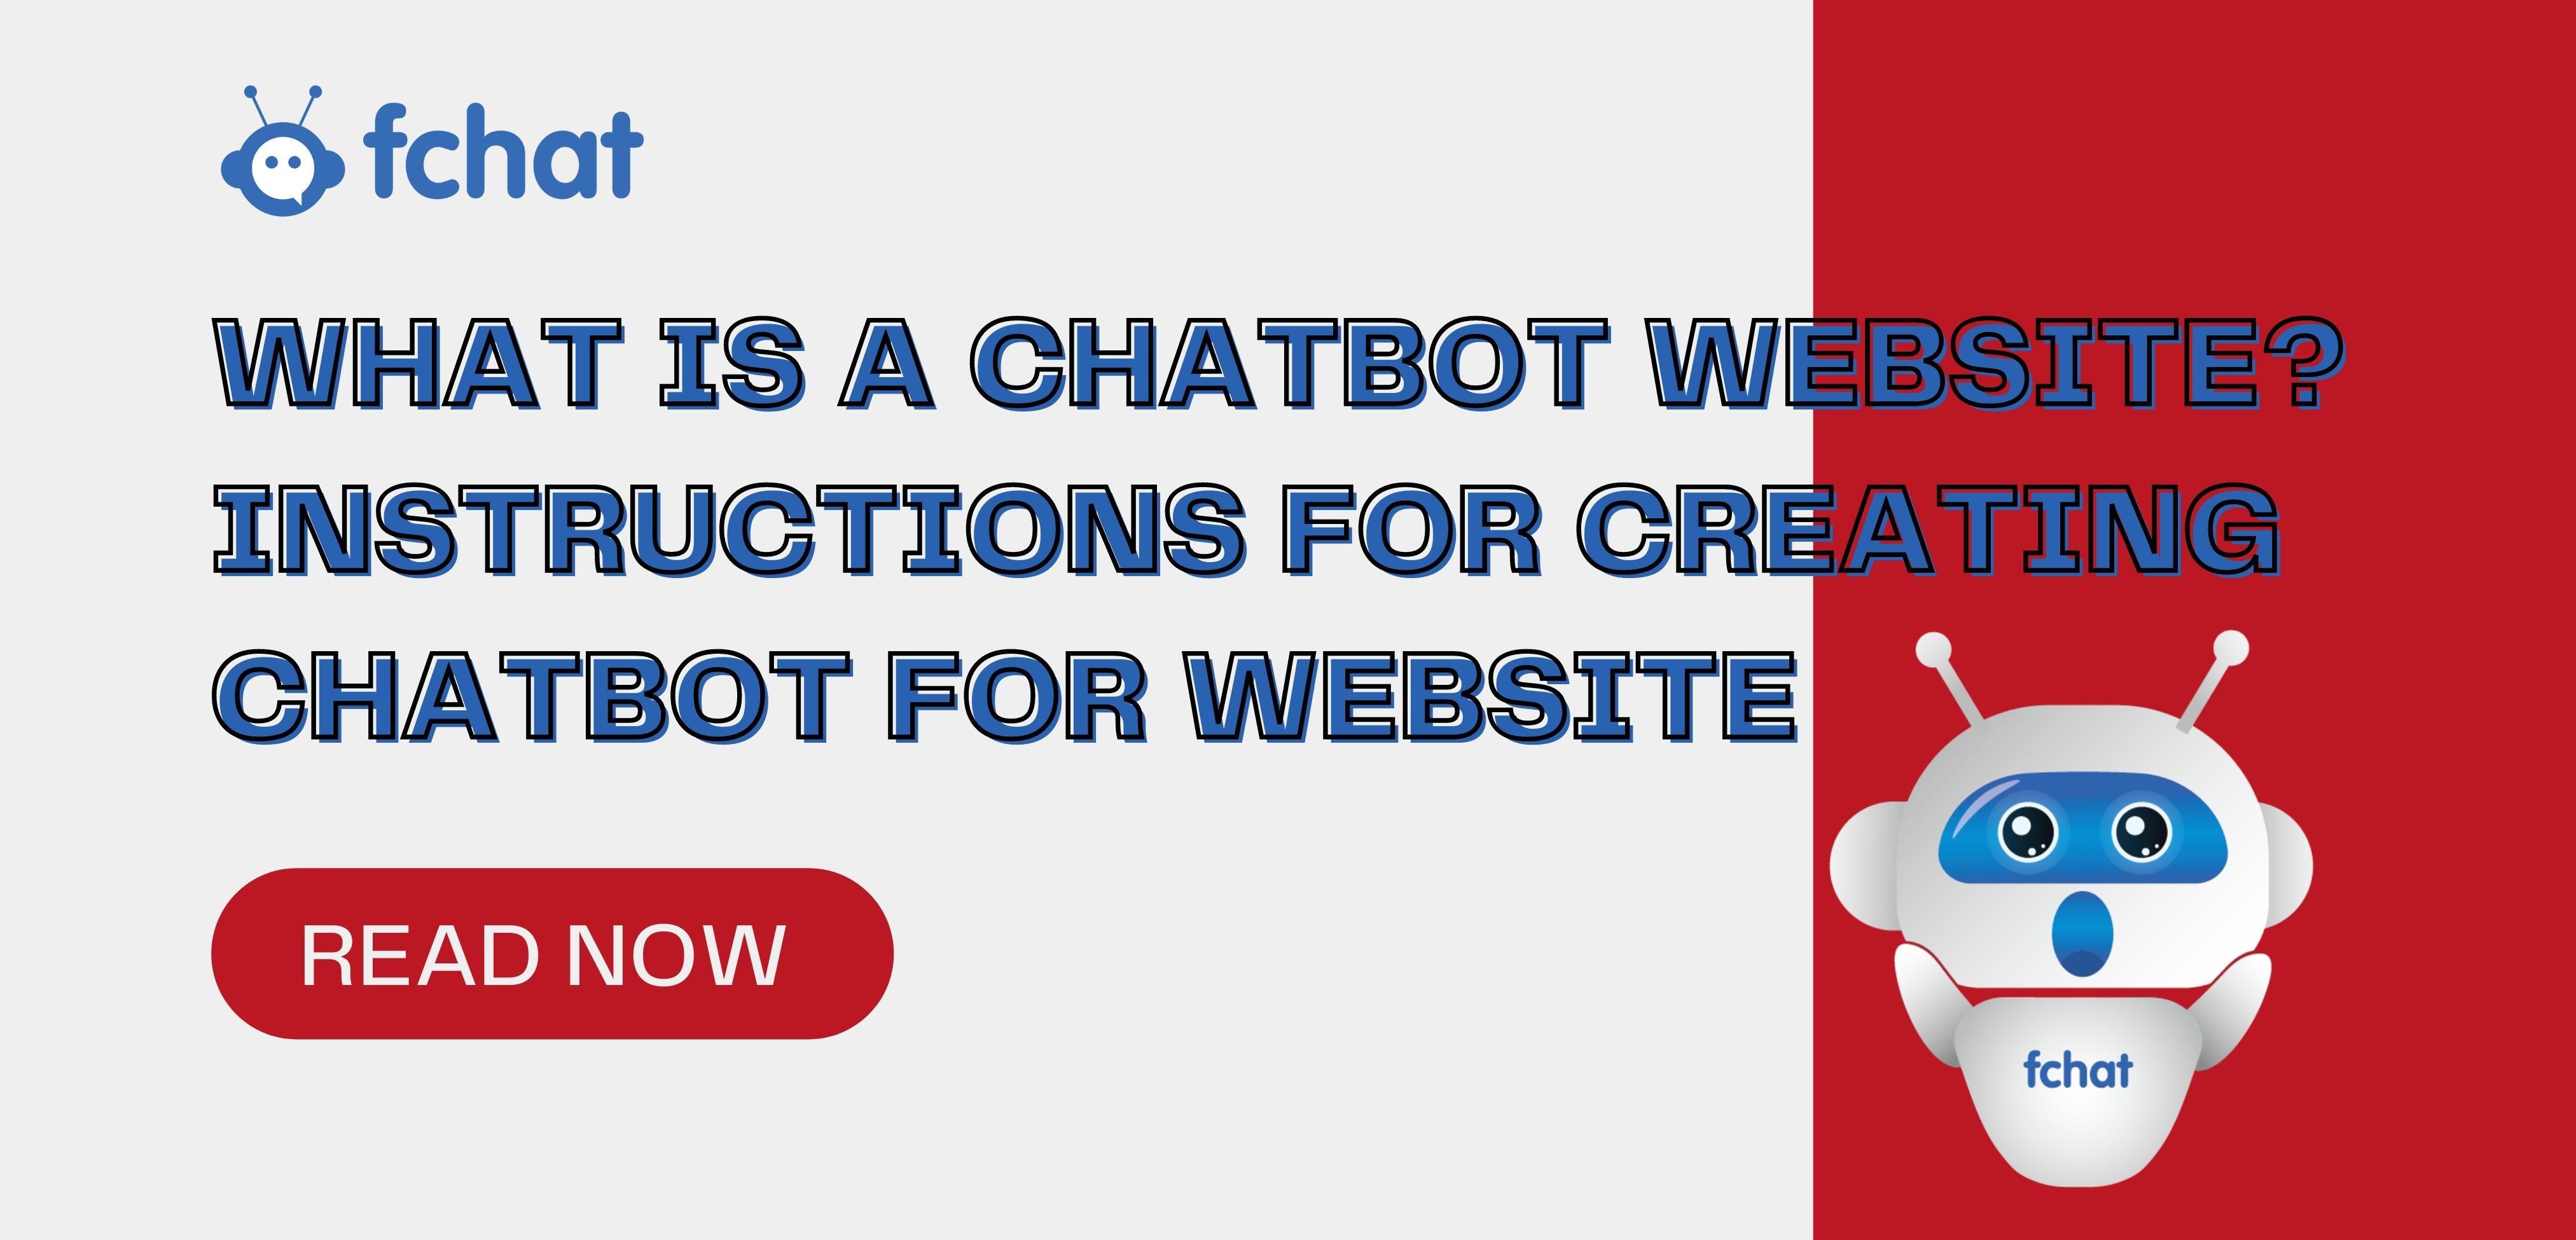 WHAT IS A CHATBOT WEBSITE? INSTRUCTIONS FOR CREATING CHATBOT FOR WEBSITE